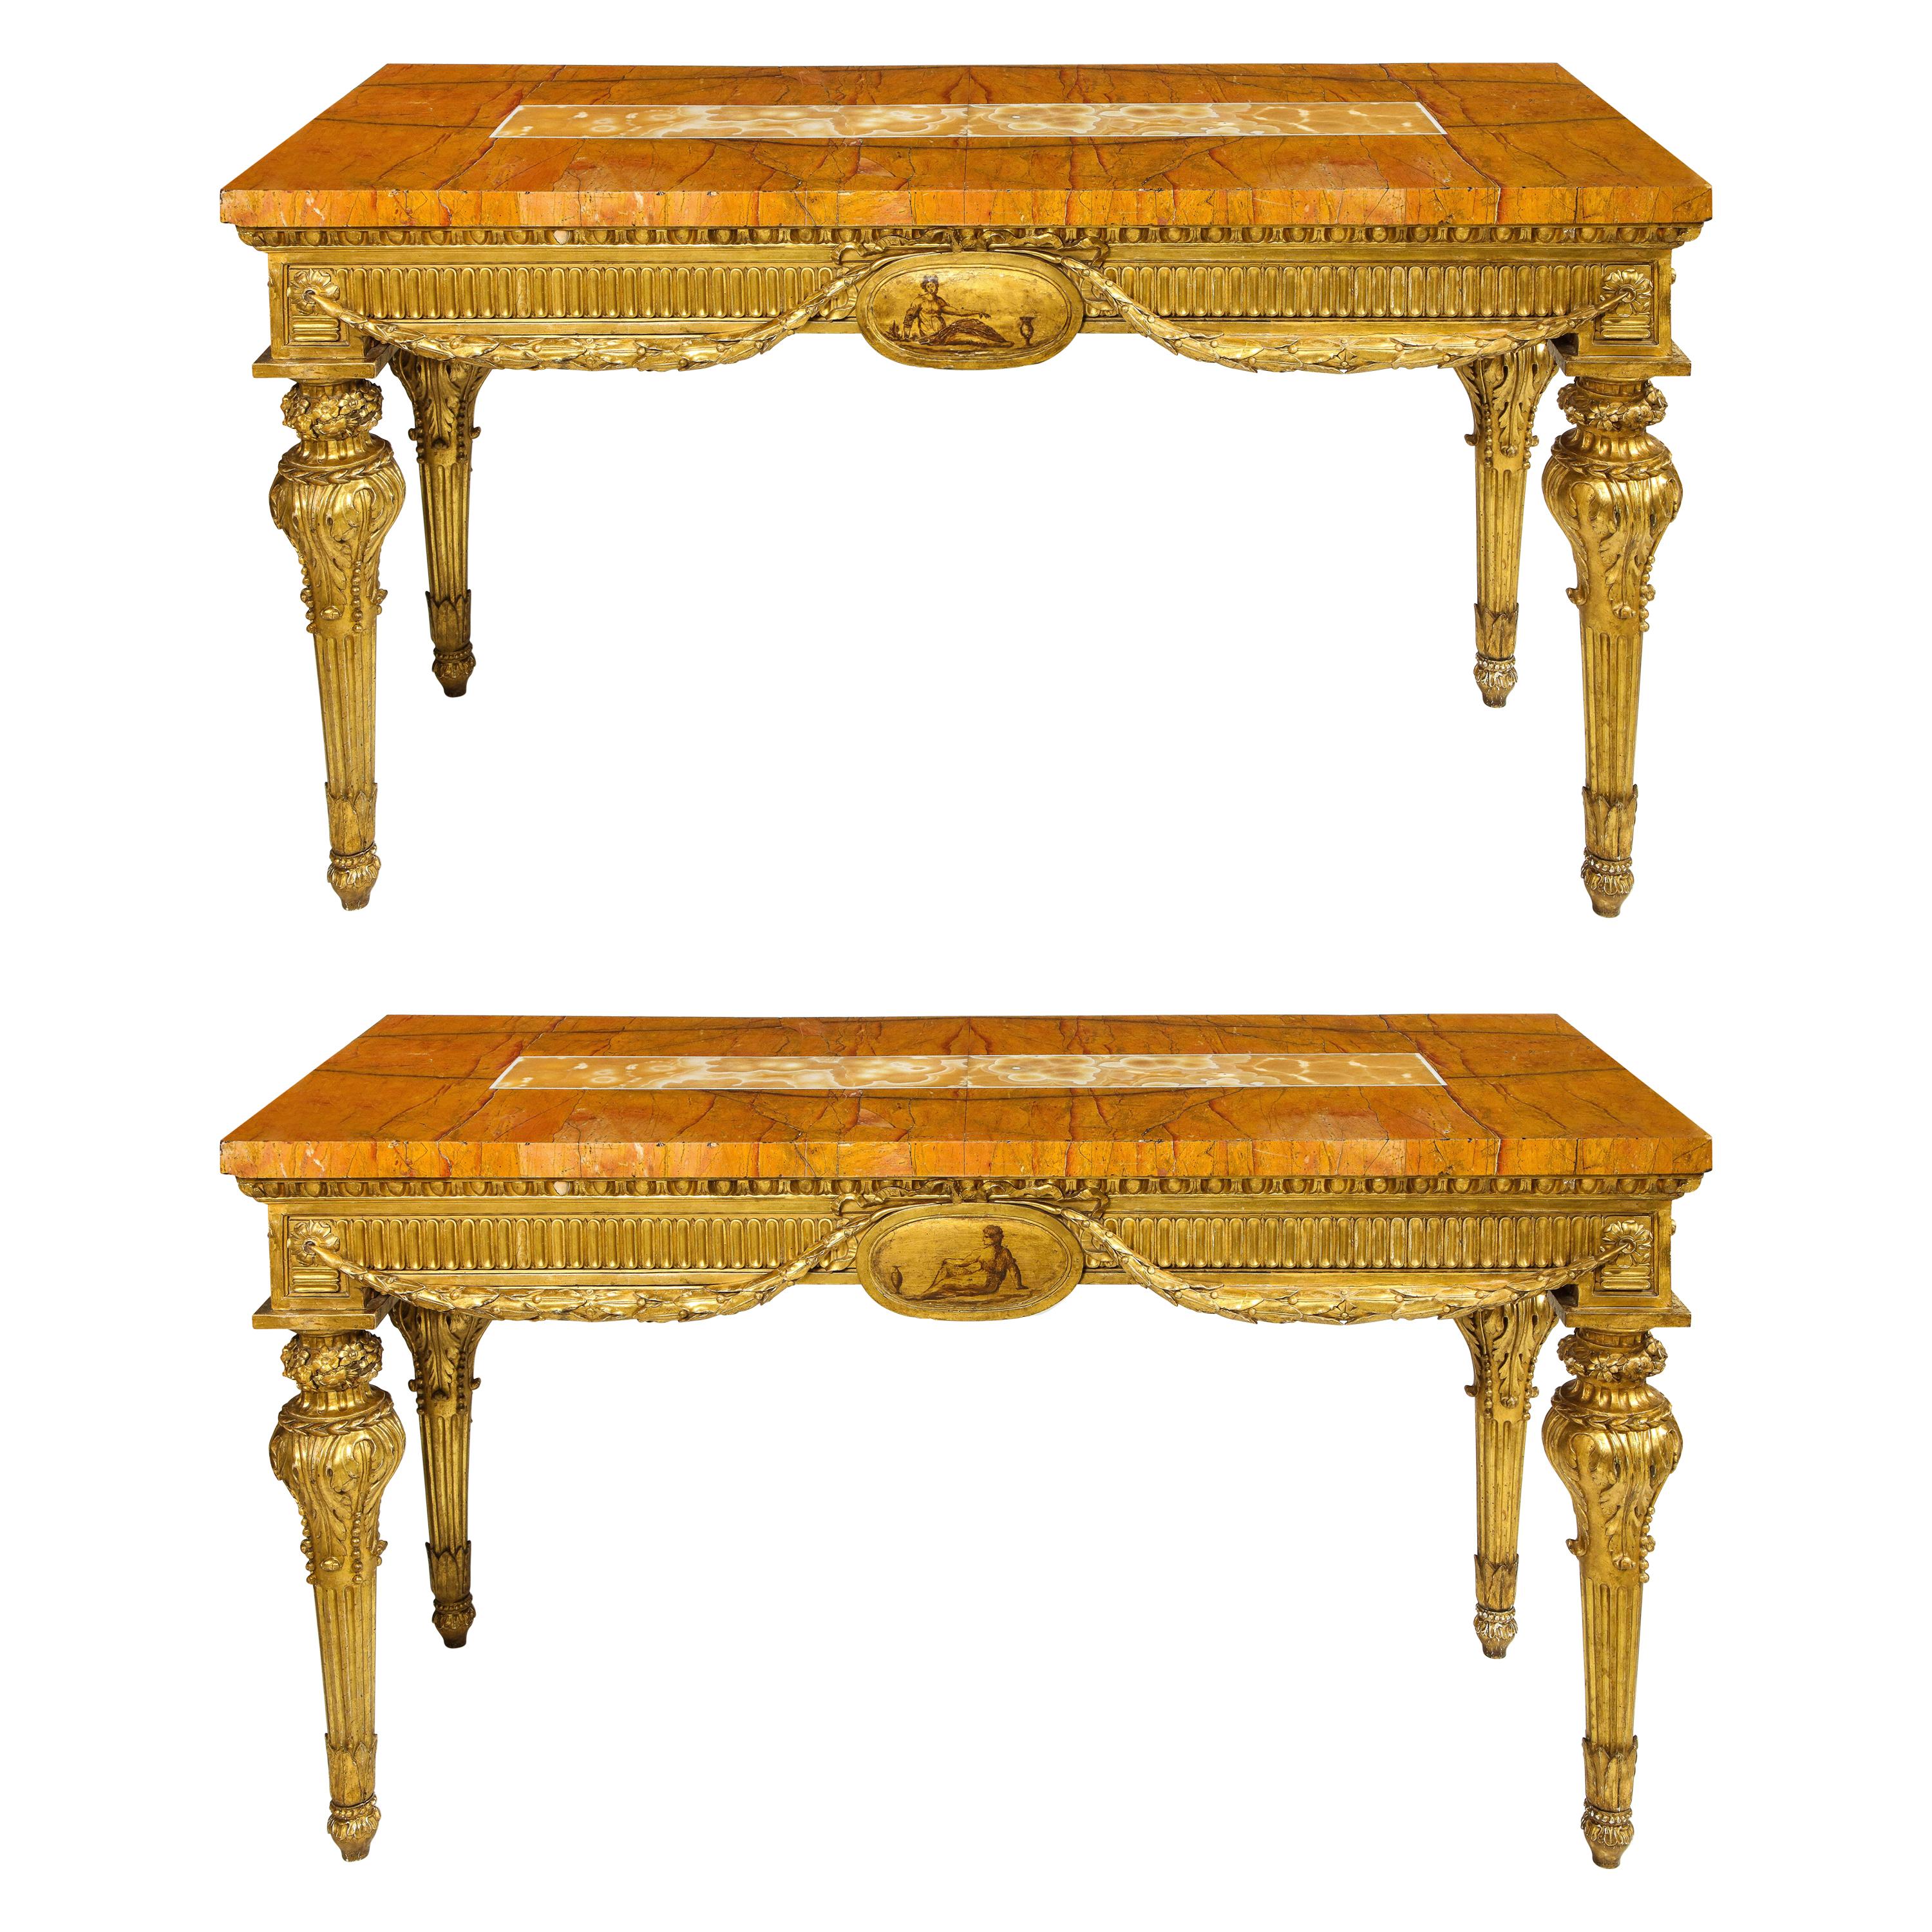 Pair of Fine North Italian Giltwood Side Tables/Consoles with Marble Tops For Sale